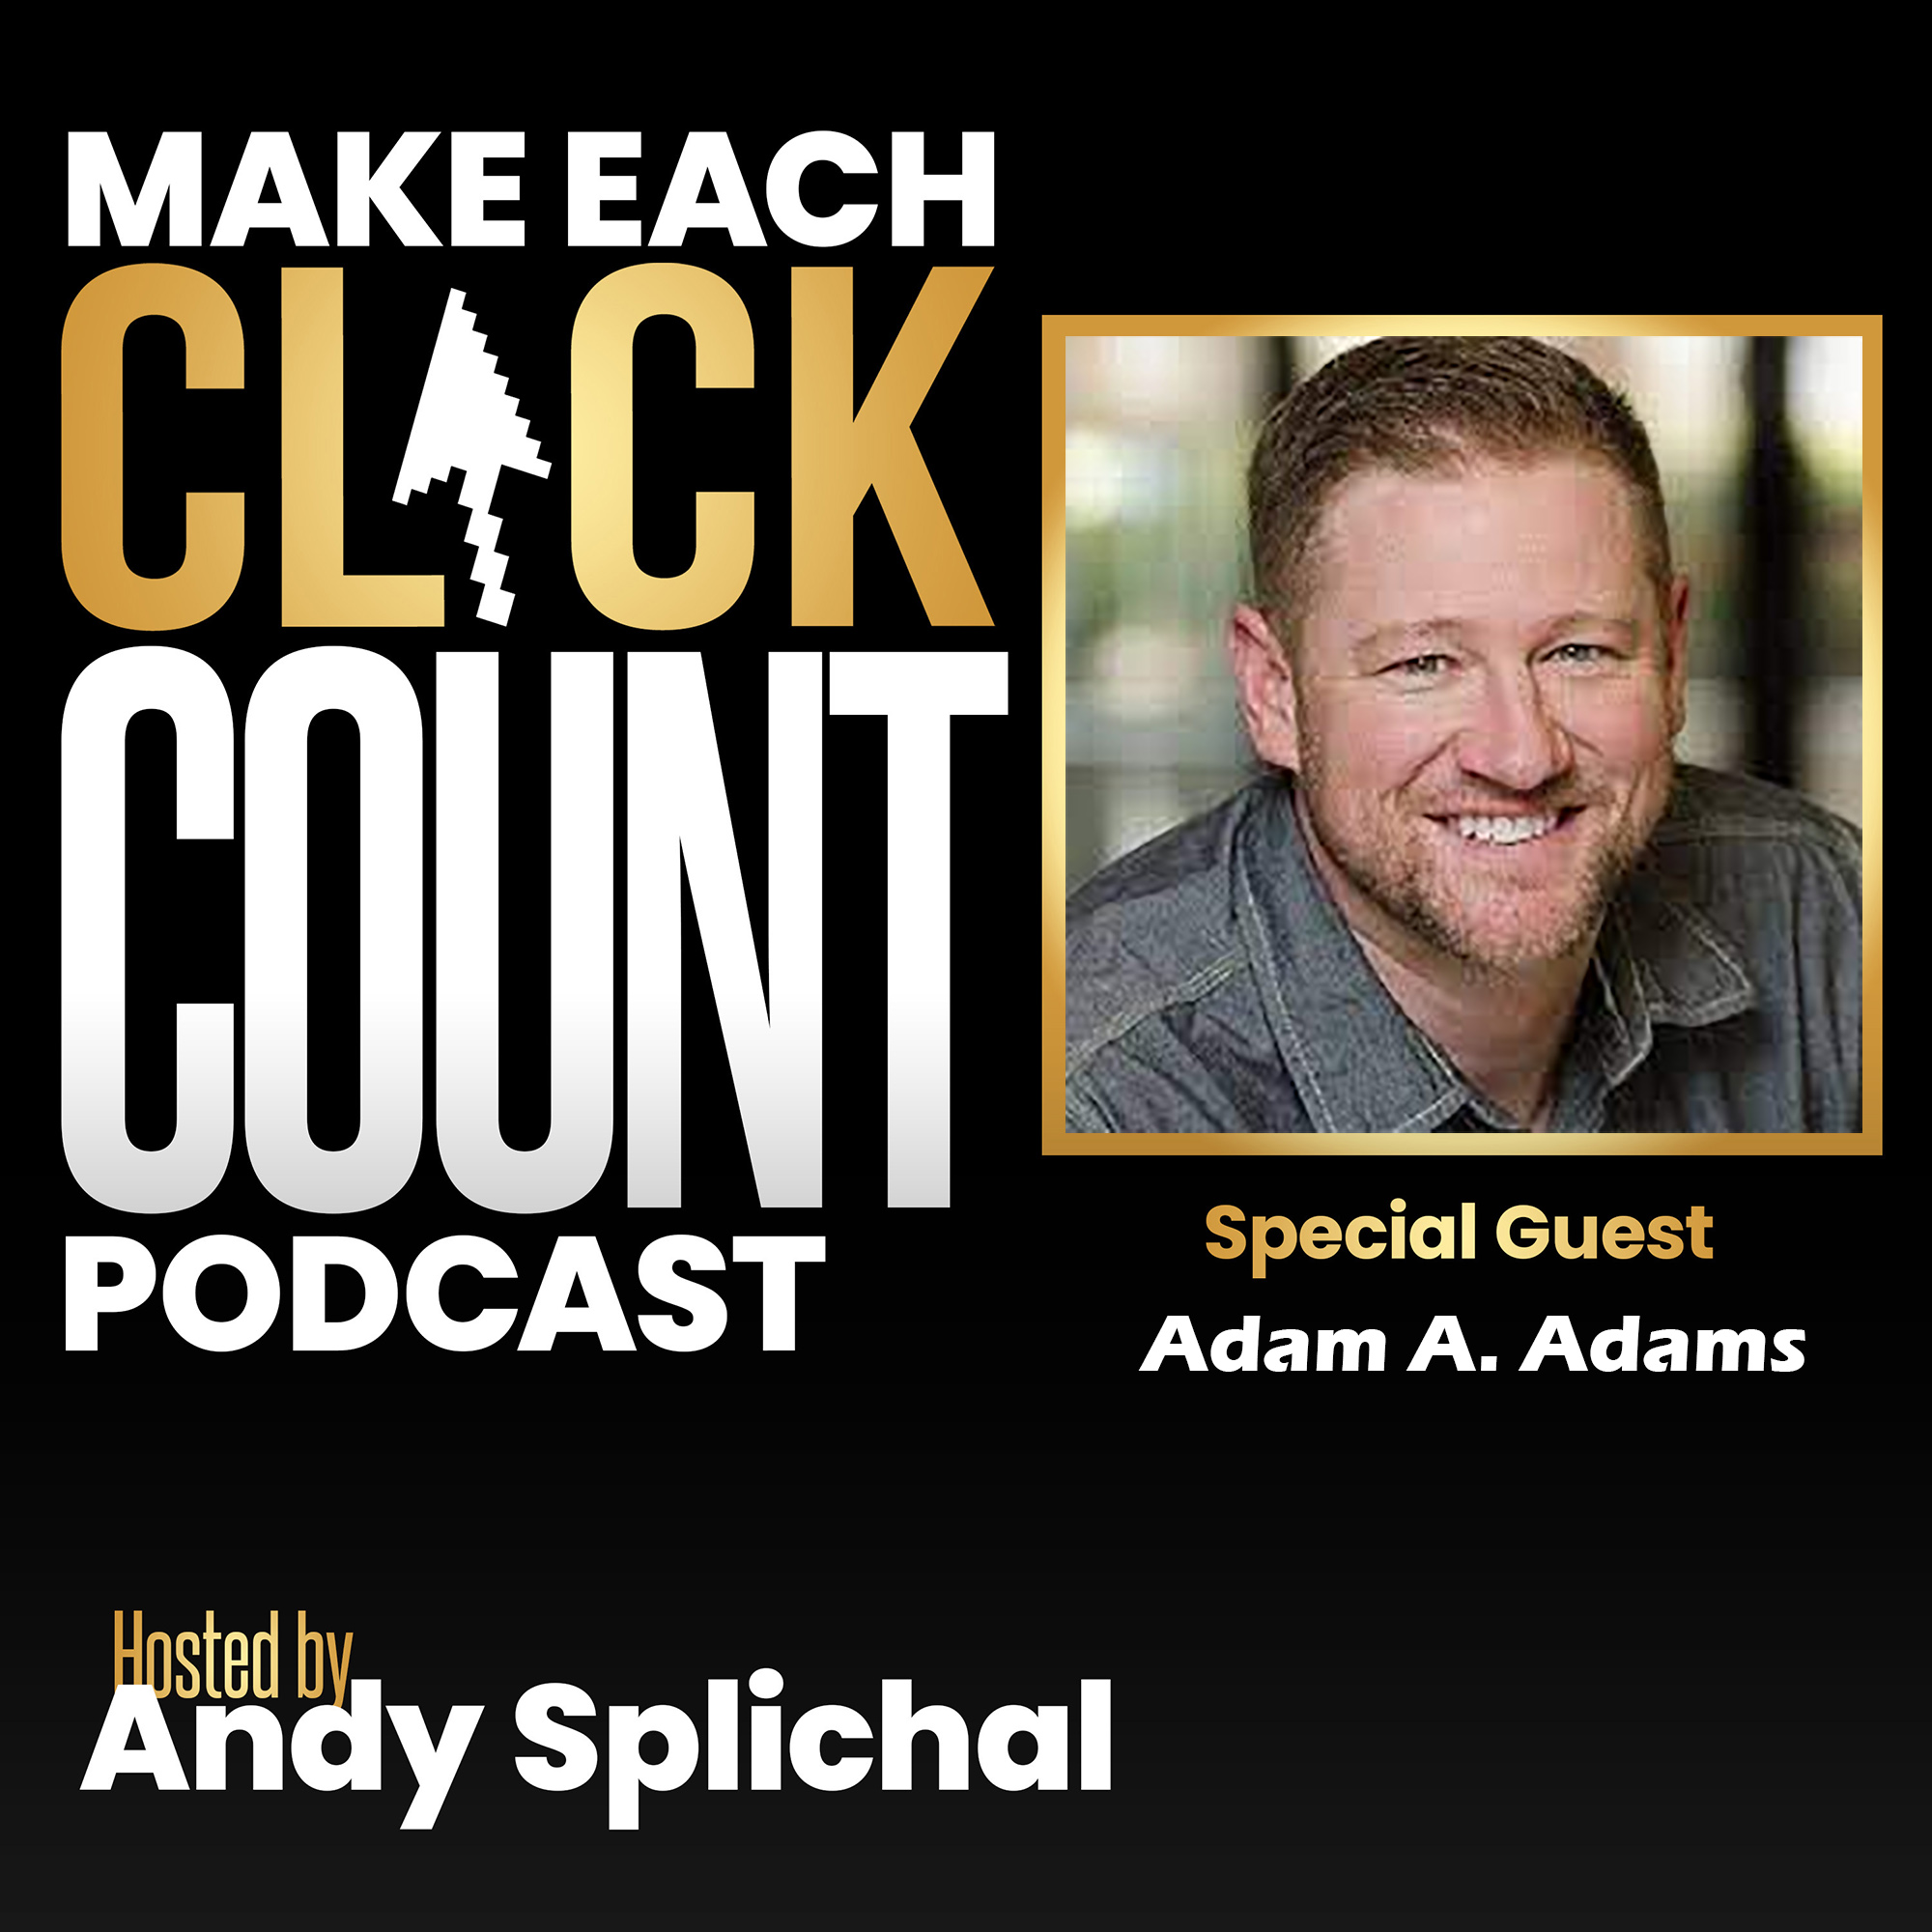 A Podcast On Podcast - Launching Your Own Podcast With Adam A. Adams Image